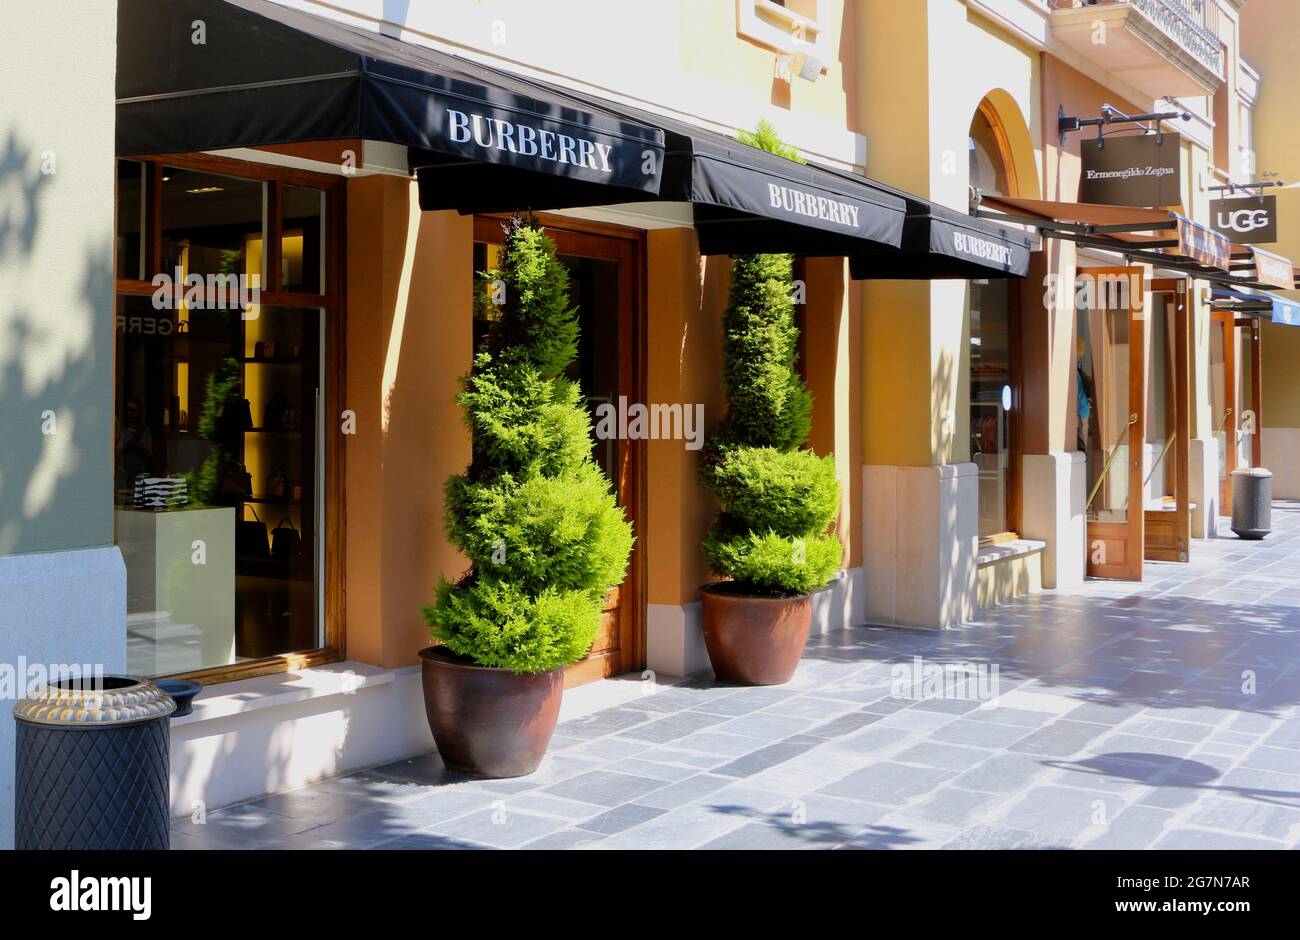 Burberry shop entrance with topiary bushes Las Rozas Madrid Spain Summer  Stock Photo - Alamy